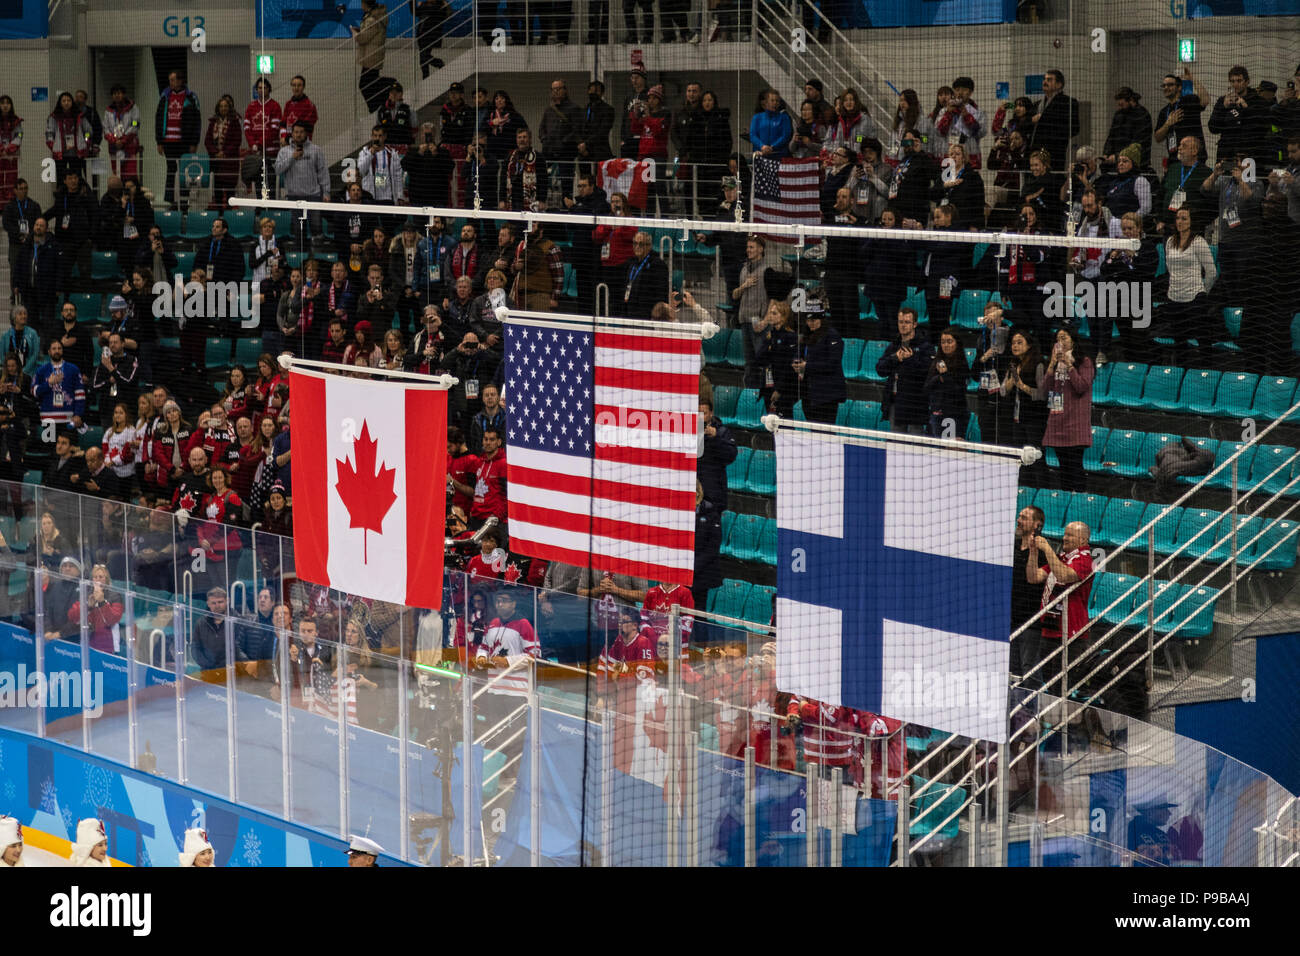 Flags of Team USA wins the Gold medal, Team Canada, silver and Team Finland, bronze in Women's Ice Hockey at the Olympic Winter Games PyeongChang 2018 Stock Photo